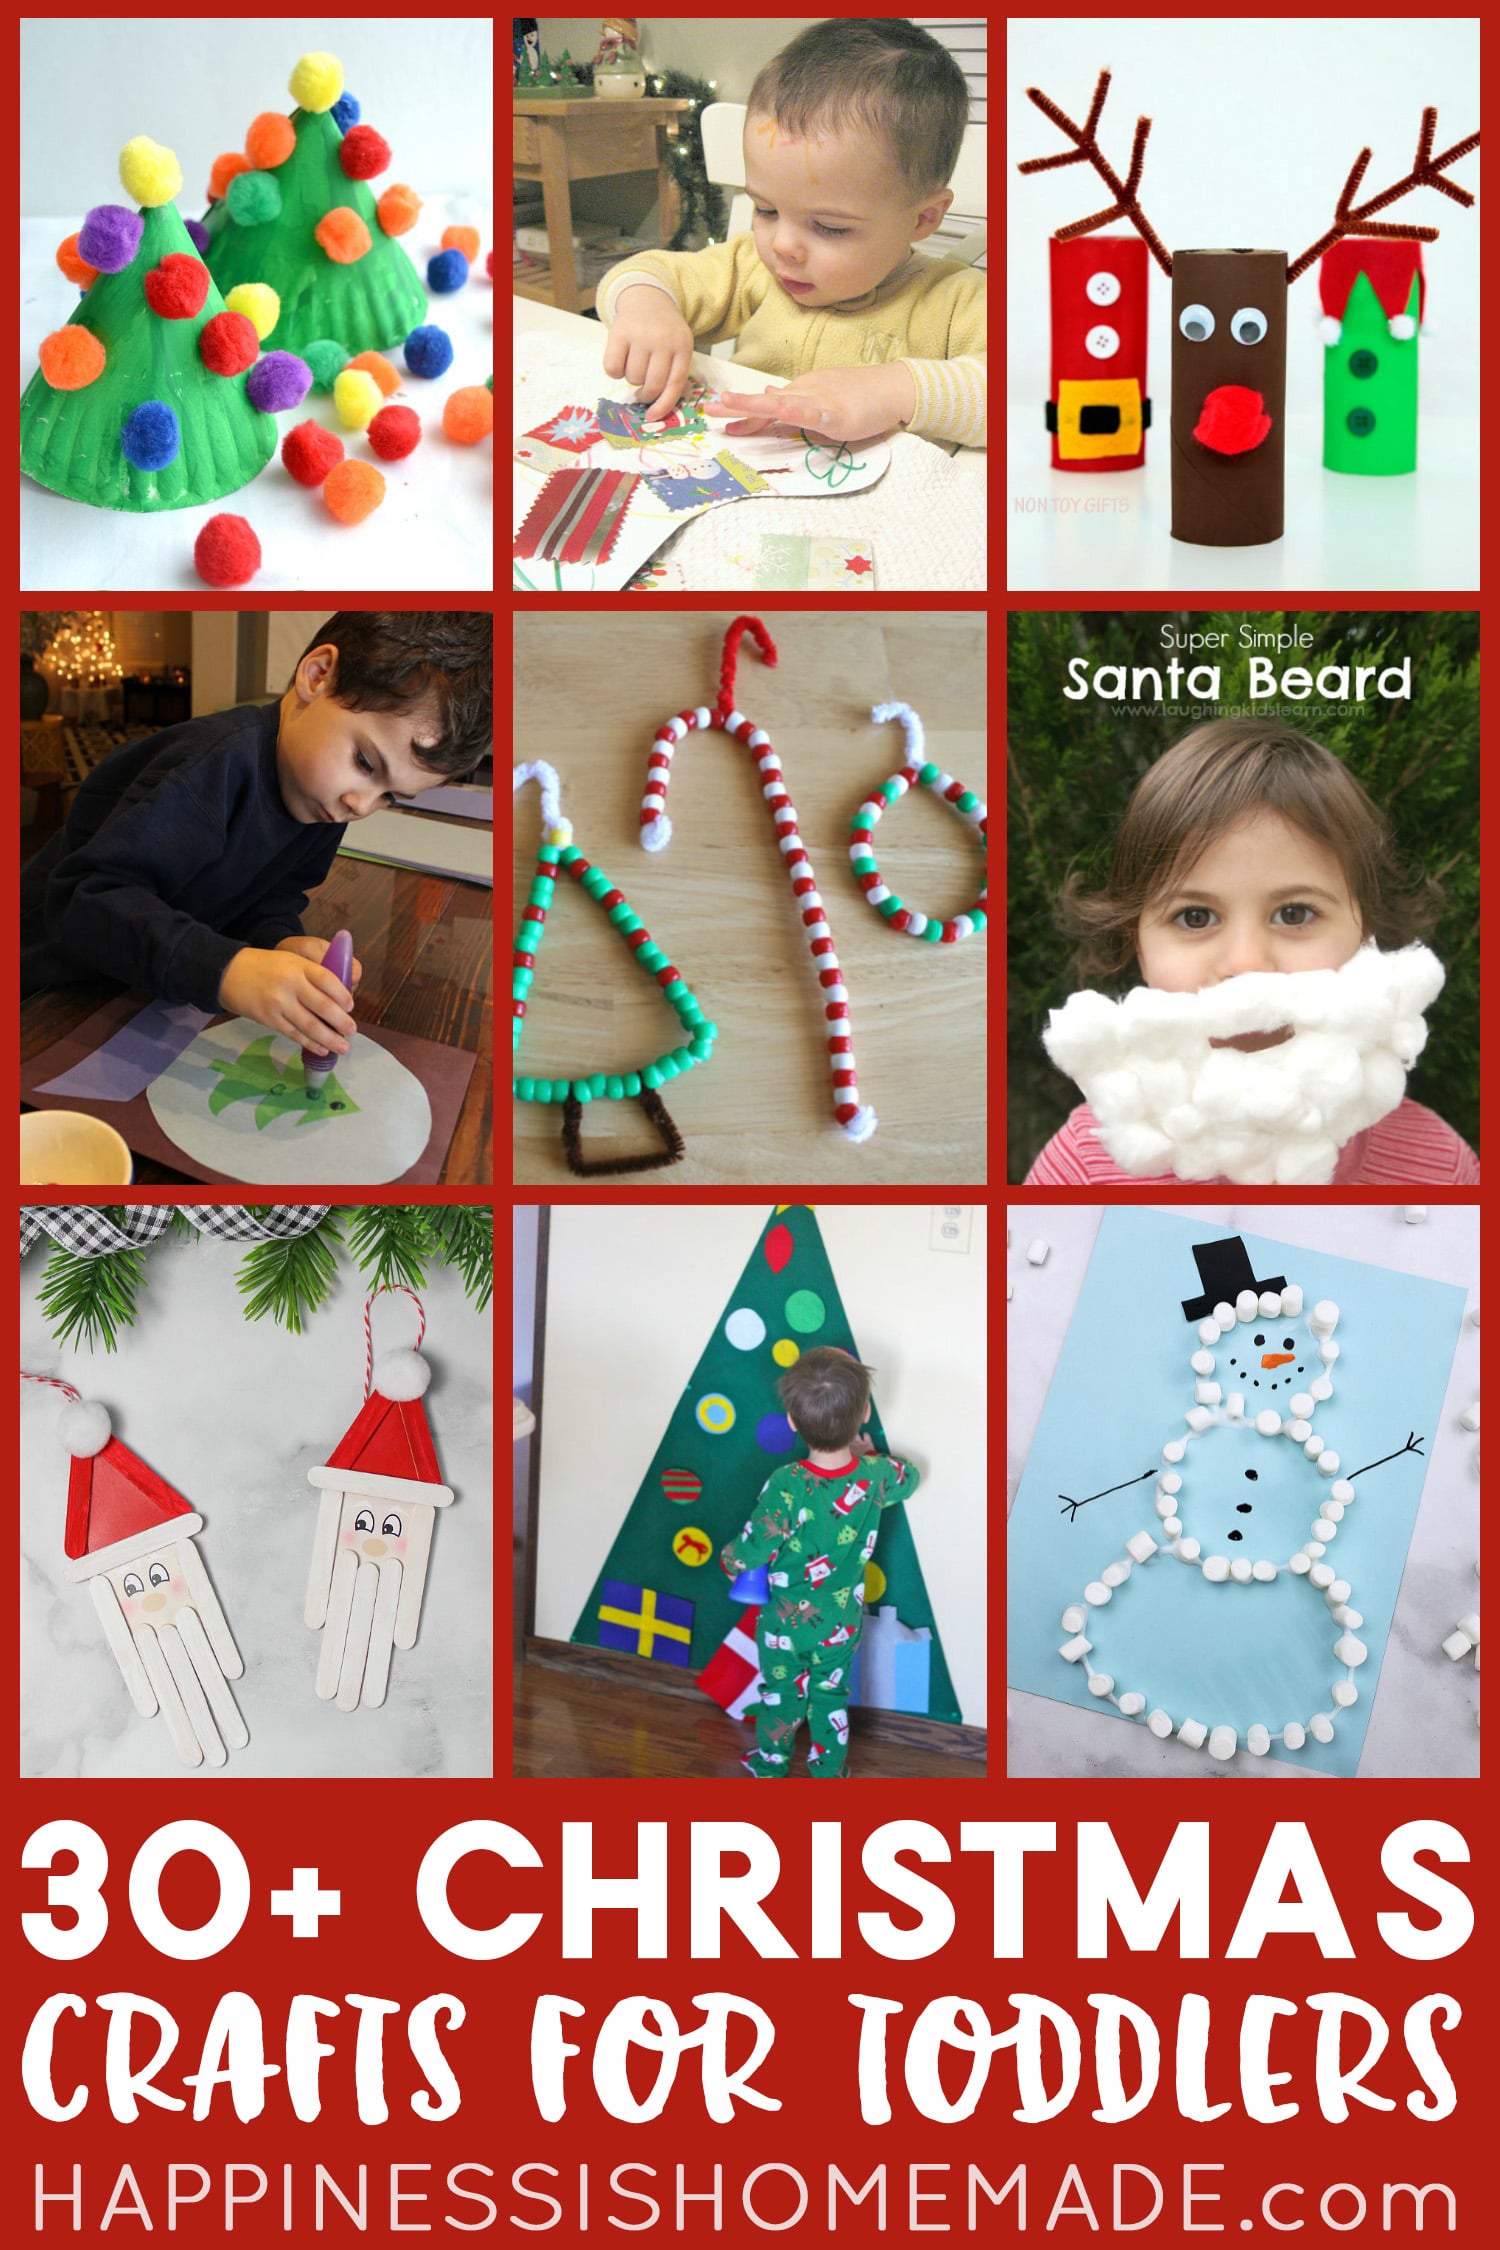 https://www.happinessishomemade.net/wp-content/uploads/2019/11/30-Christmas-Crafts-for-Toddlers.jpg